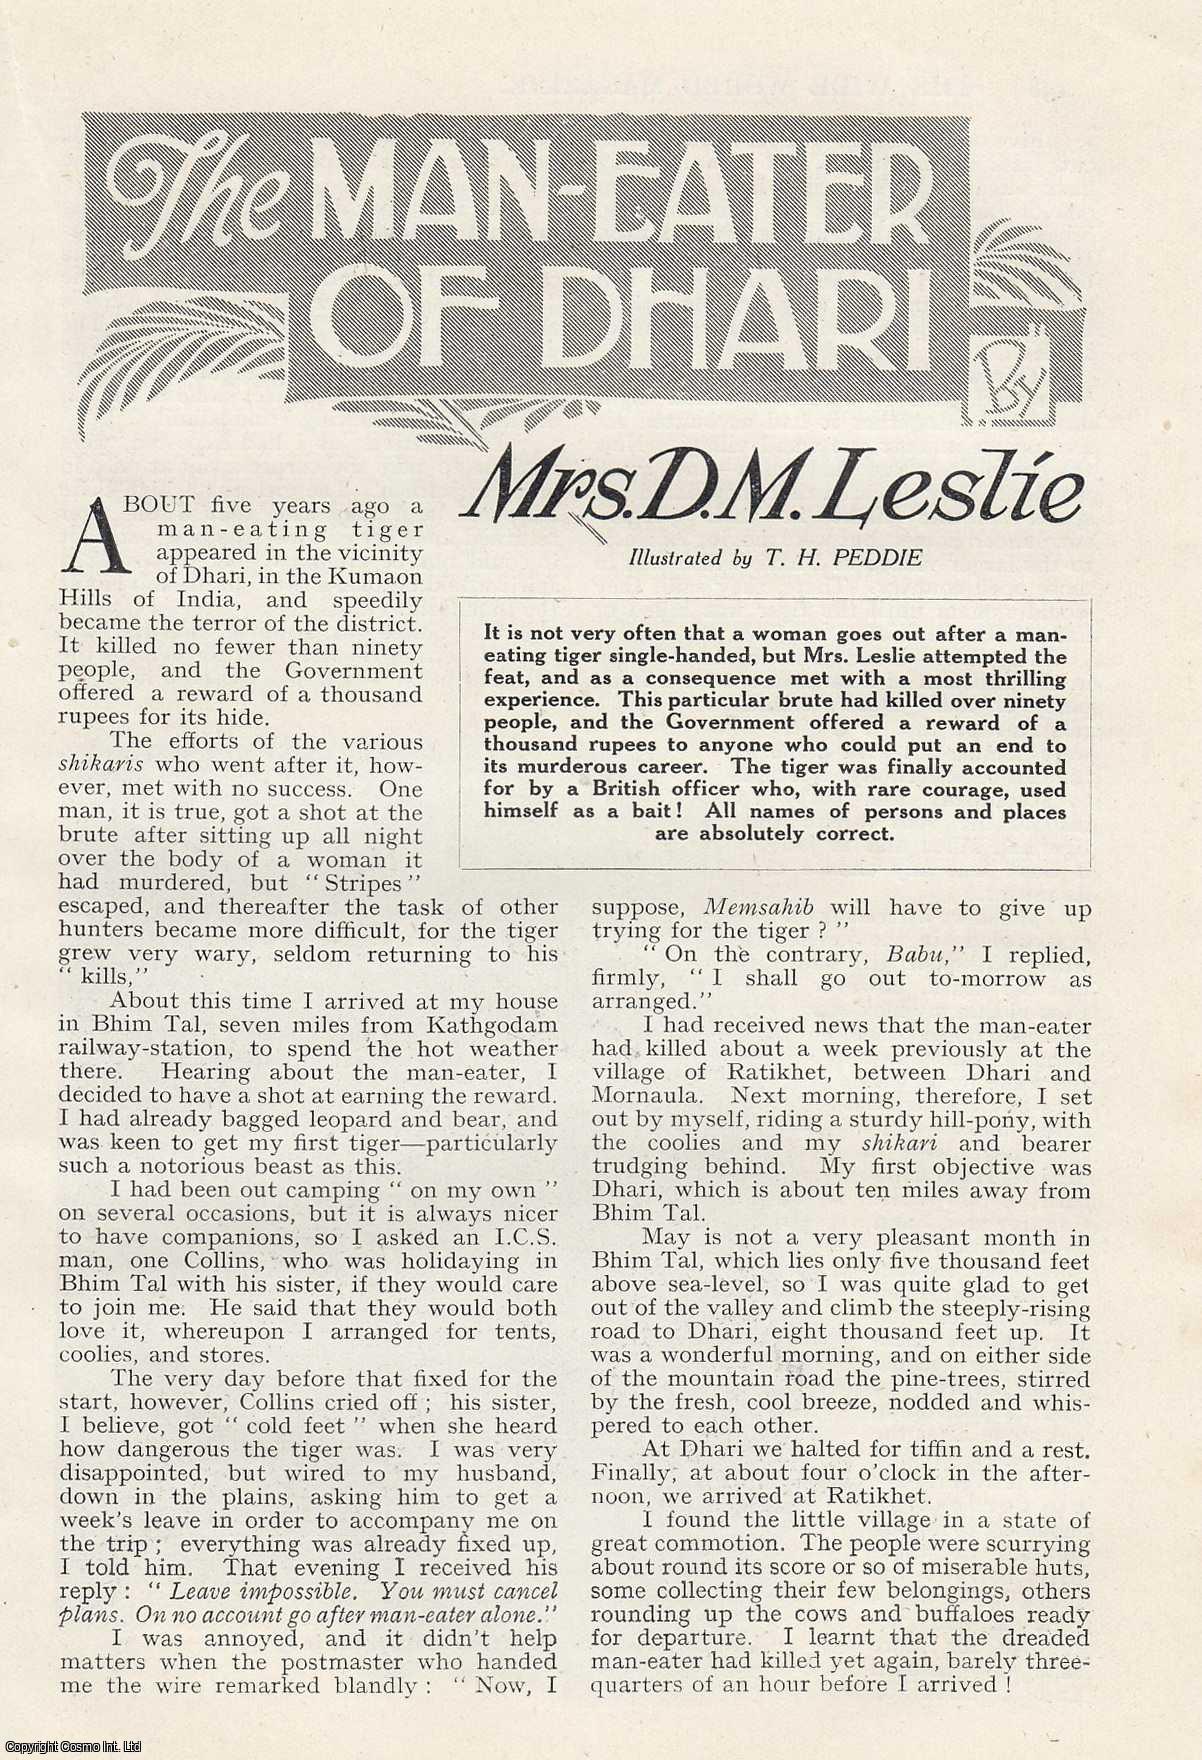 Mrs. D. M. Leslie - The Man-Eater of Dhari. A female tiger hunter. 1933. This is an original article from the Wide World Magazine.